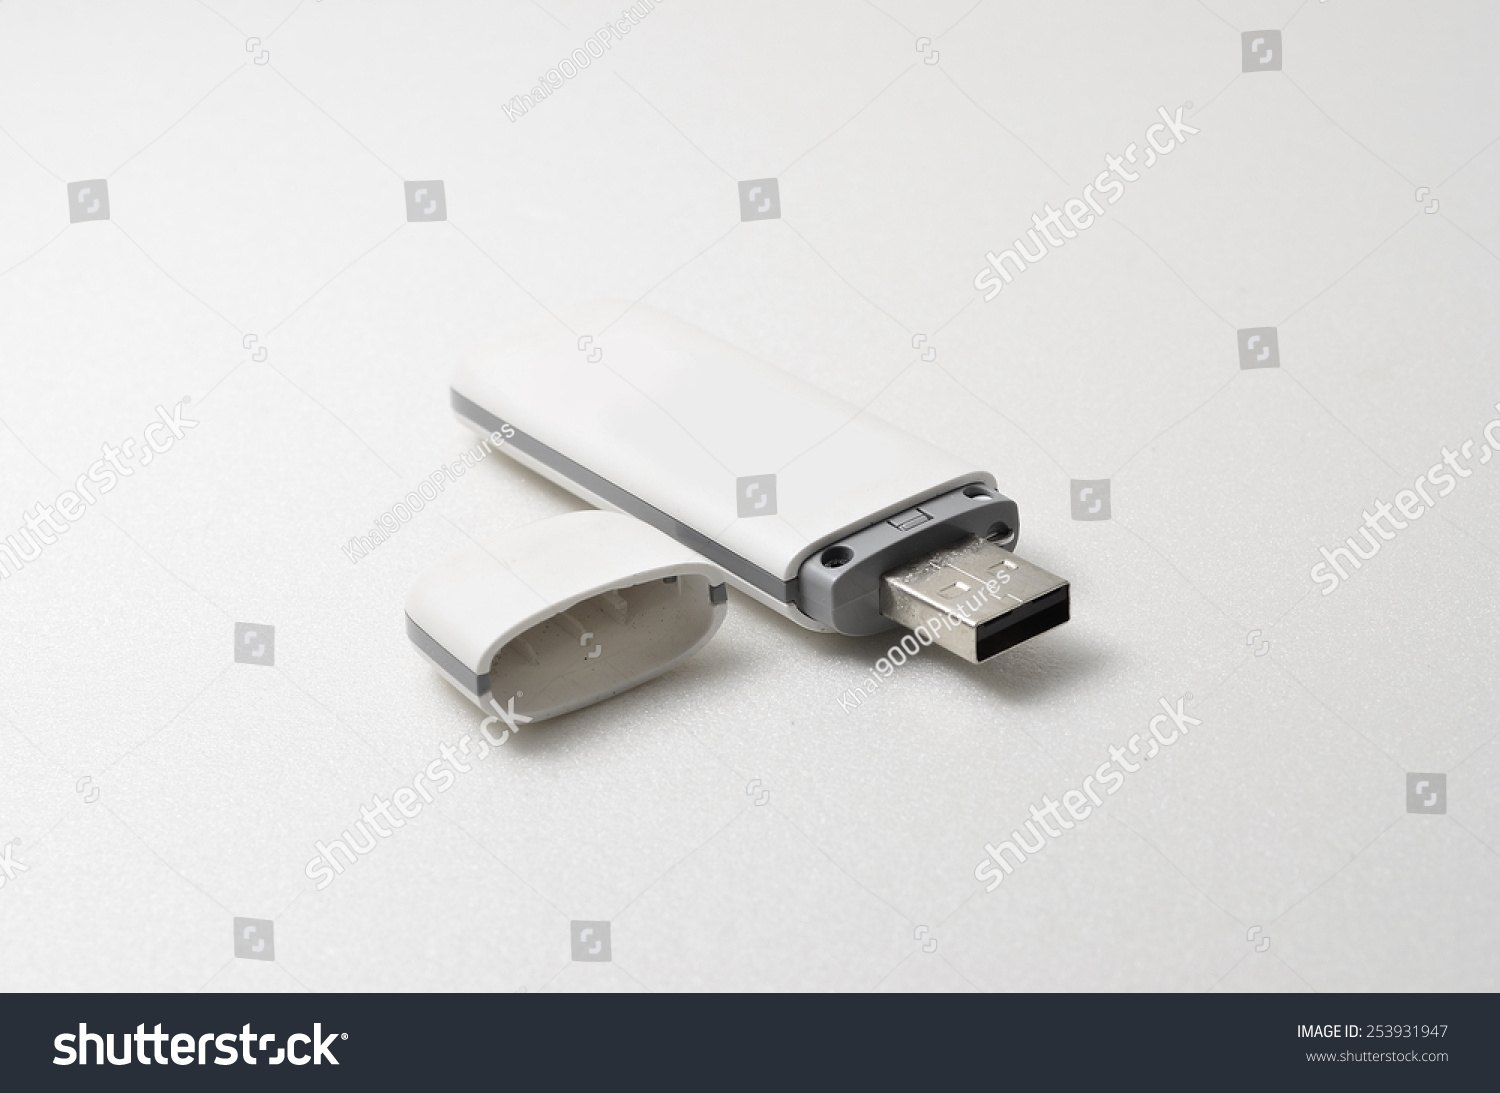 Usb Portable Modem Used Connect Internet Stock Photo Edit Now